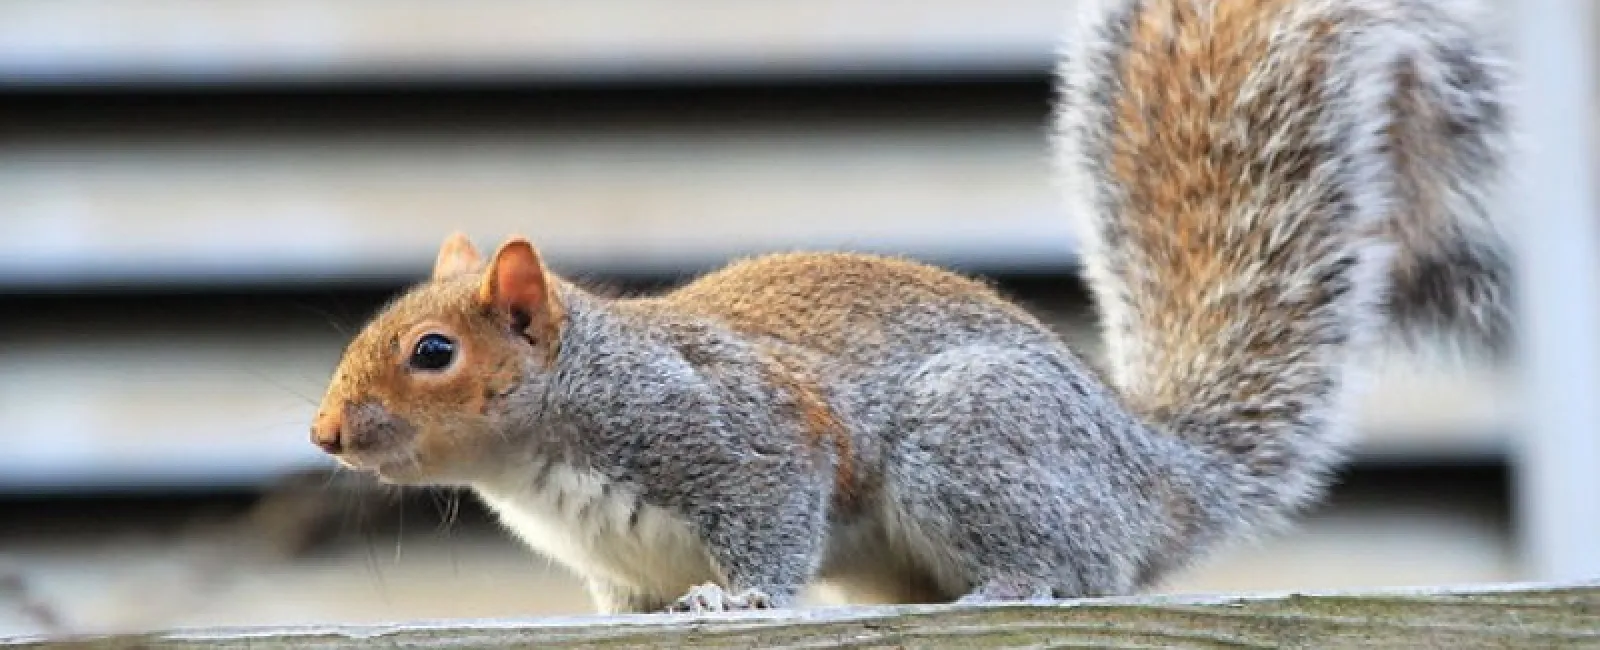 Entry Points for Squirrels and Rodents: Is Your Home Safe?